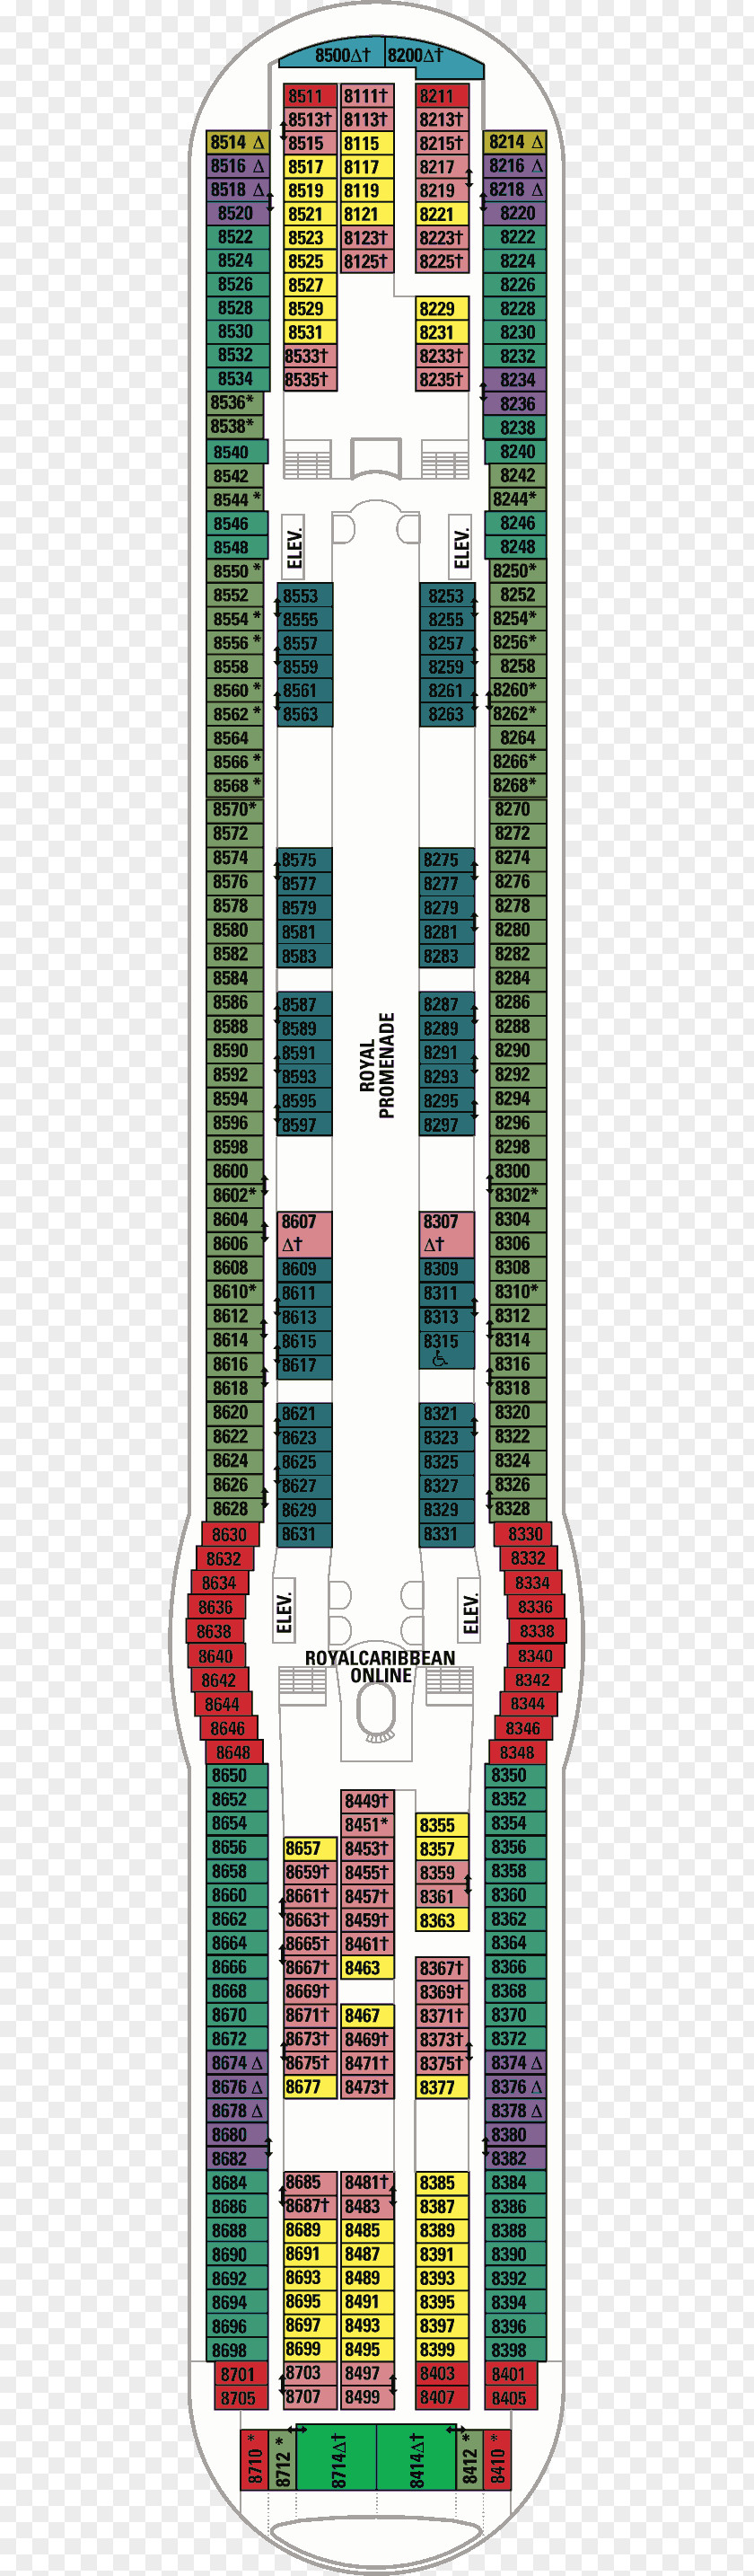 Map Liberty Promenade Deck MS Explorer Of The Seas Cruise Ship Freedom Independence PNG